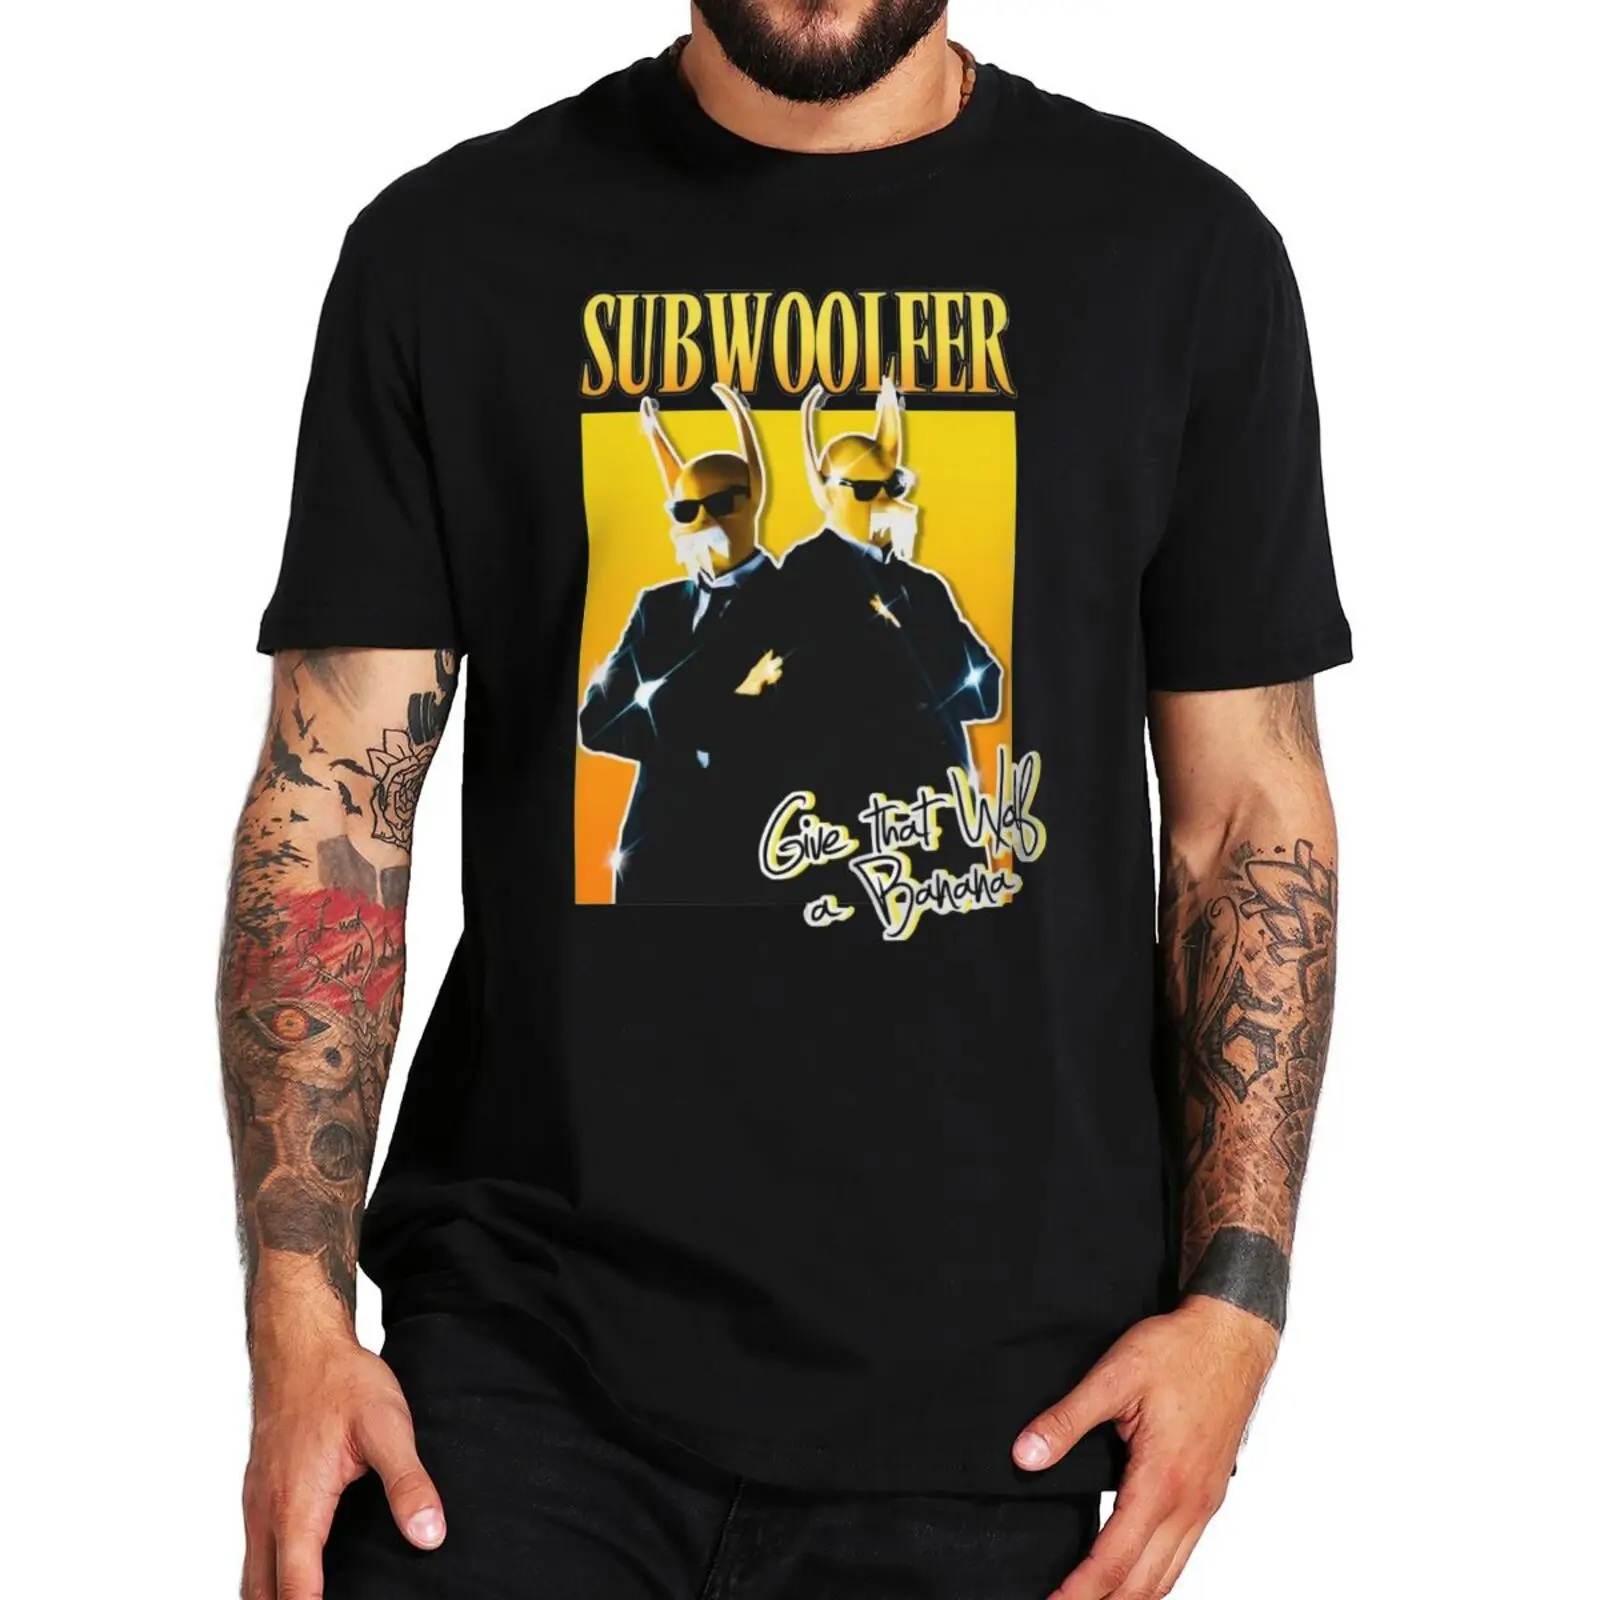 

Subwoolfer Give That Wolf A Banana T Shirt Norway Band Fans 2022 Gifts Tee Tops Summer EU Size Cotton Soft T-shirt